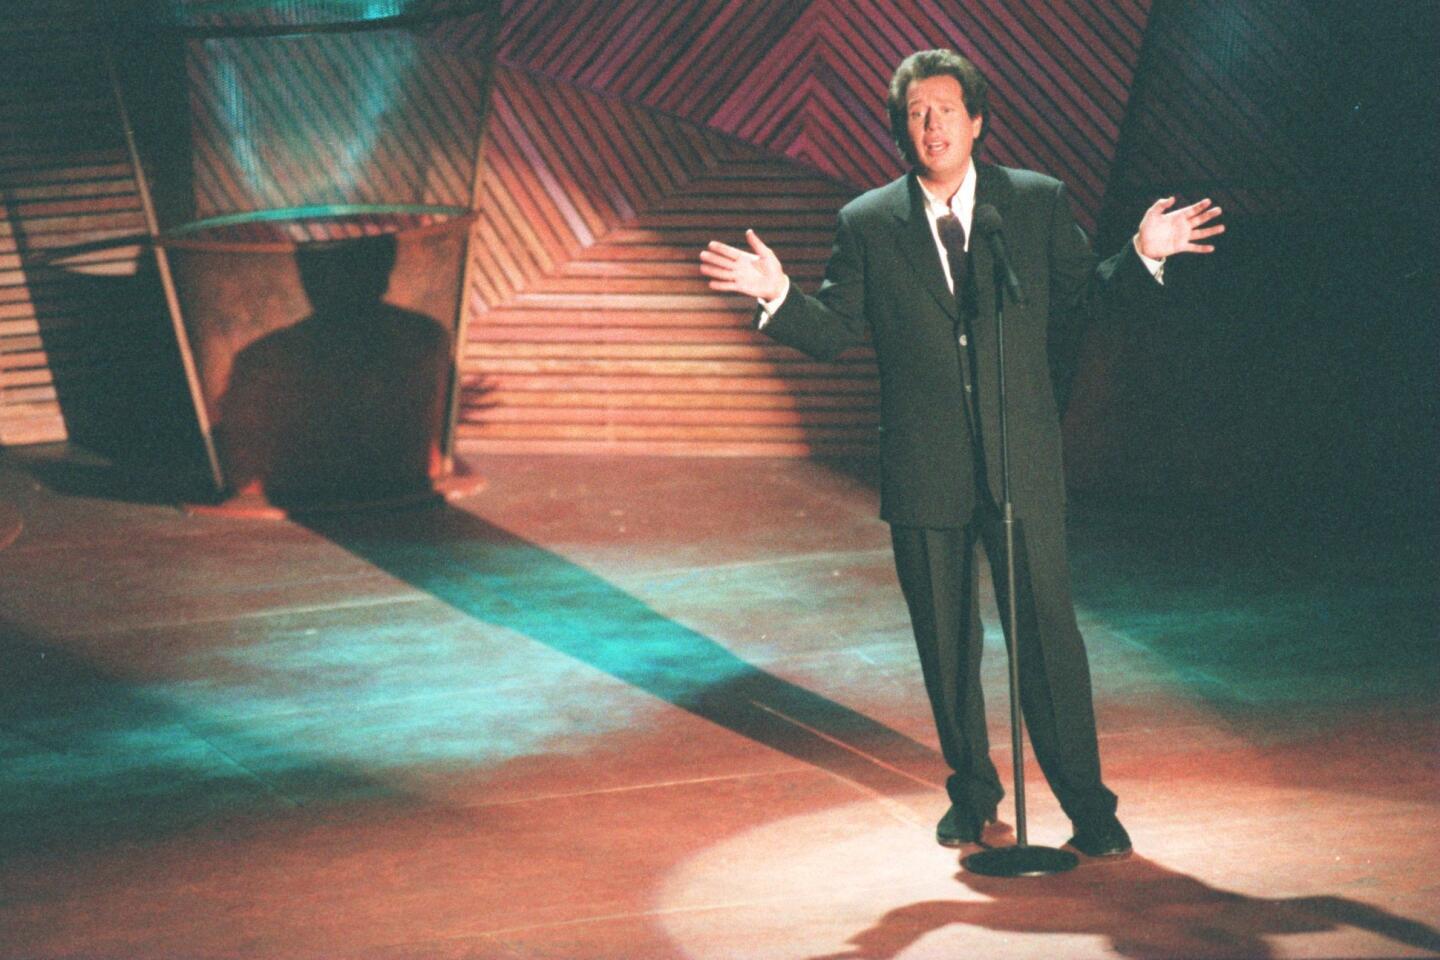 Garry Shandling: Life in pictures